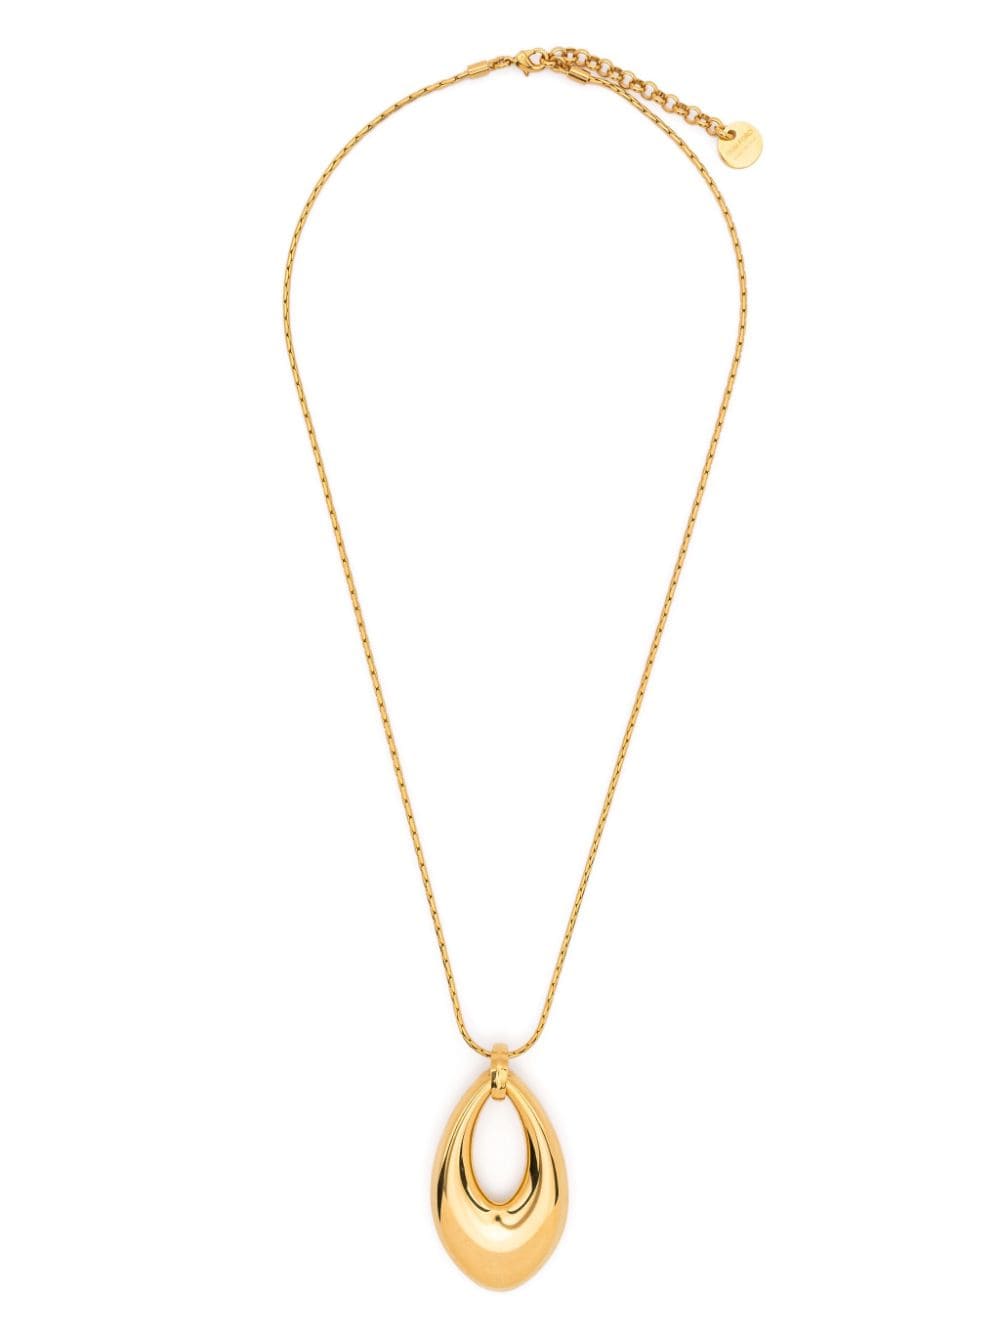 TOM FORD Arp pendant necklace - Gold von TOM FORD